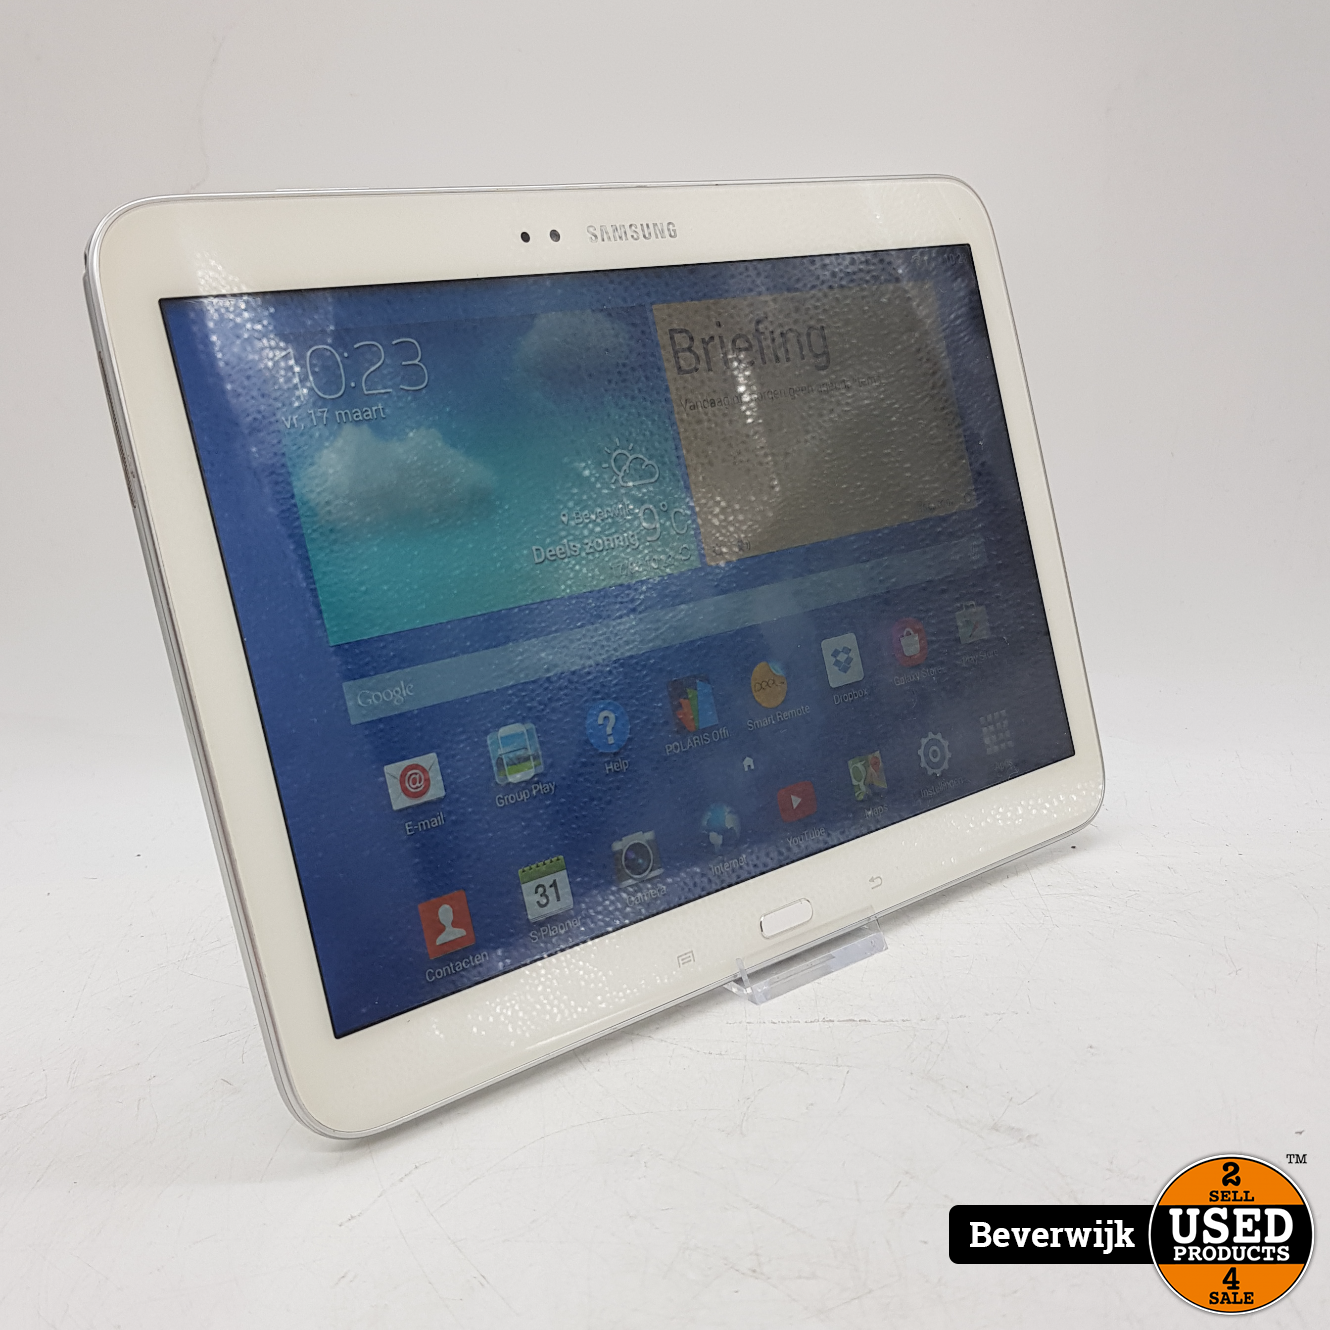 18-03 Samsung Galaxy Tab 3 16GB Android inch in Goede staat - Used Beverwijk